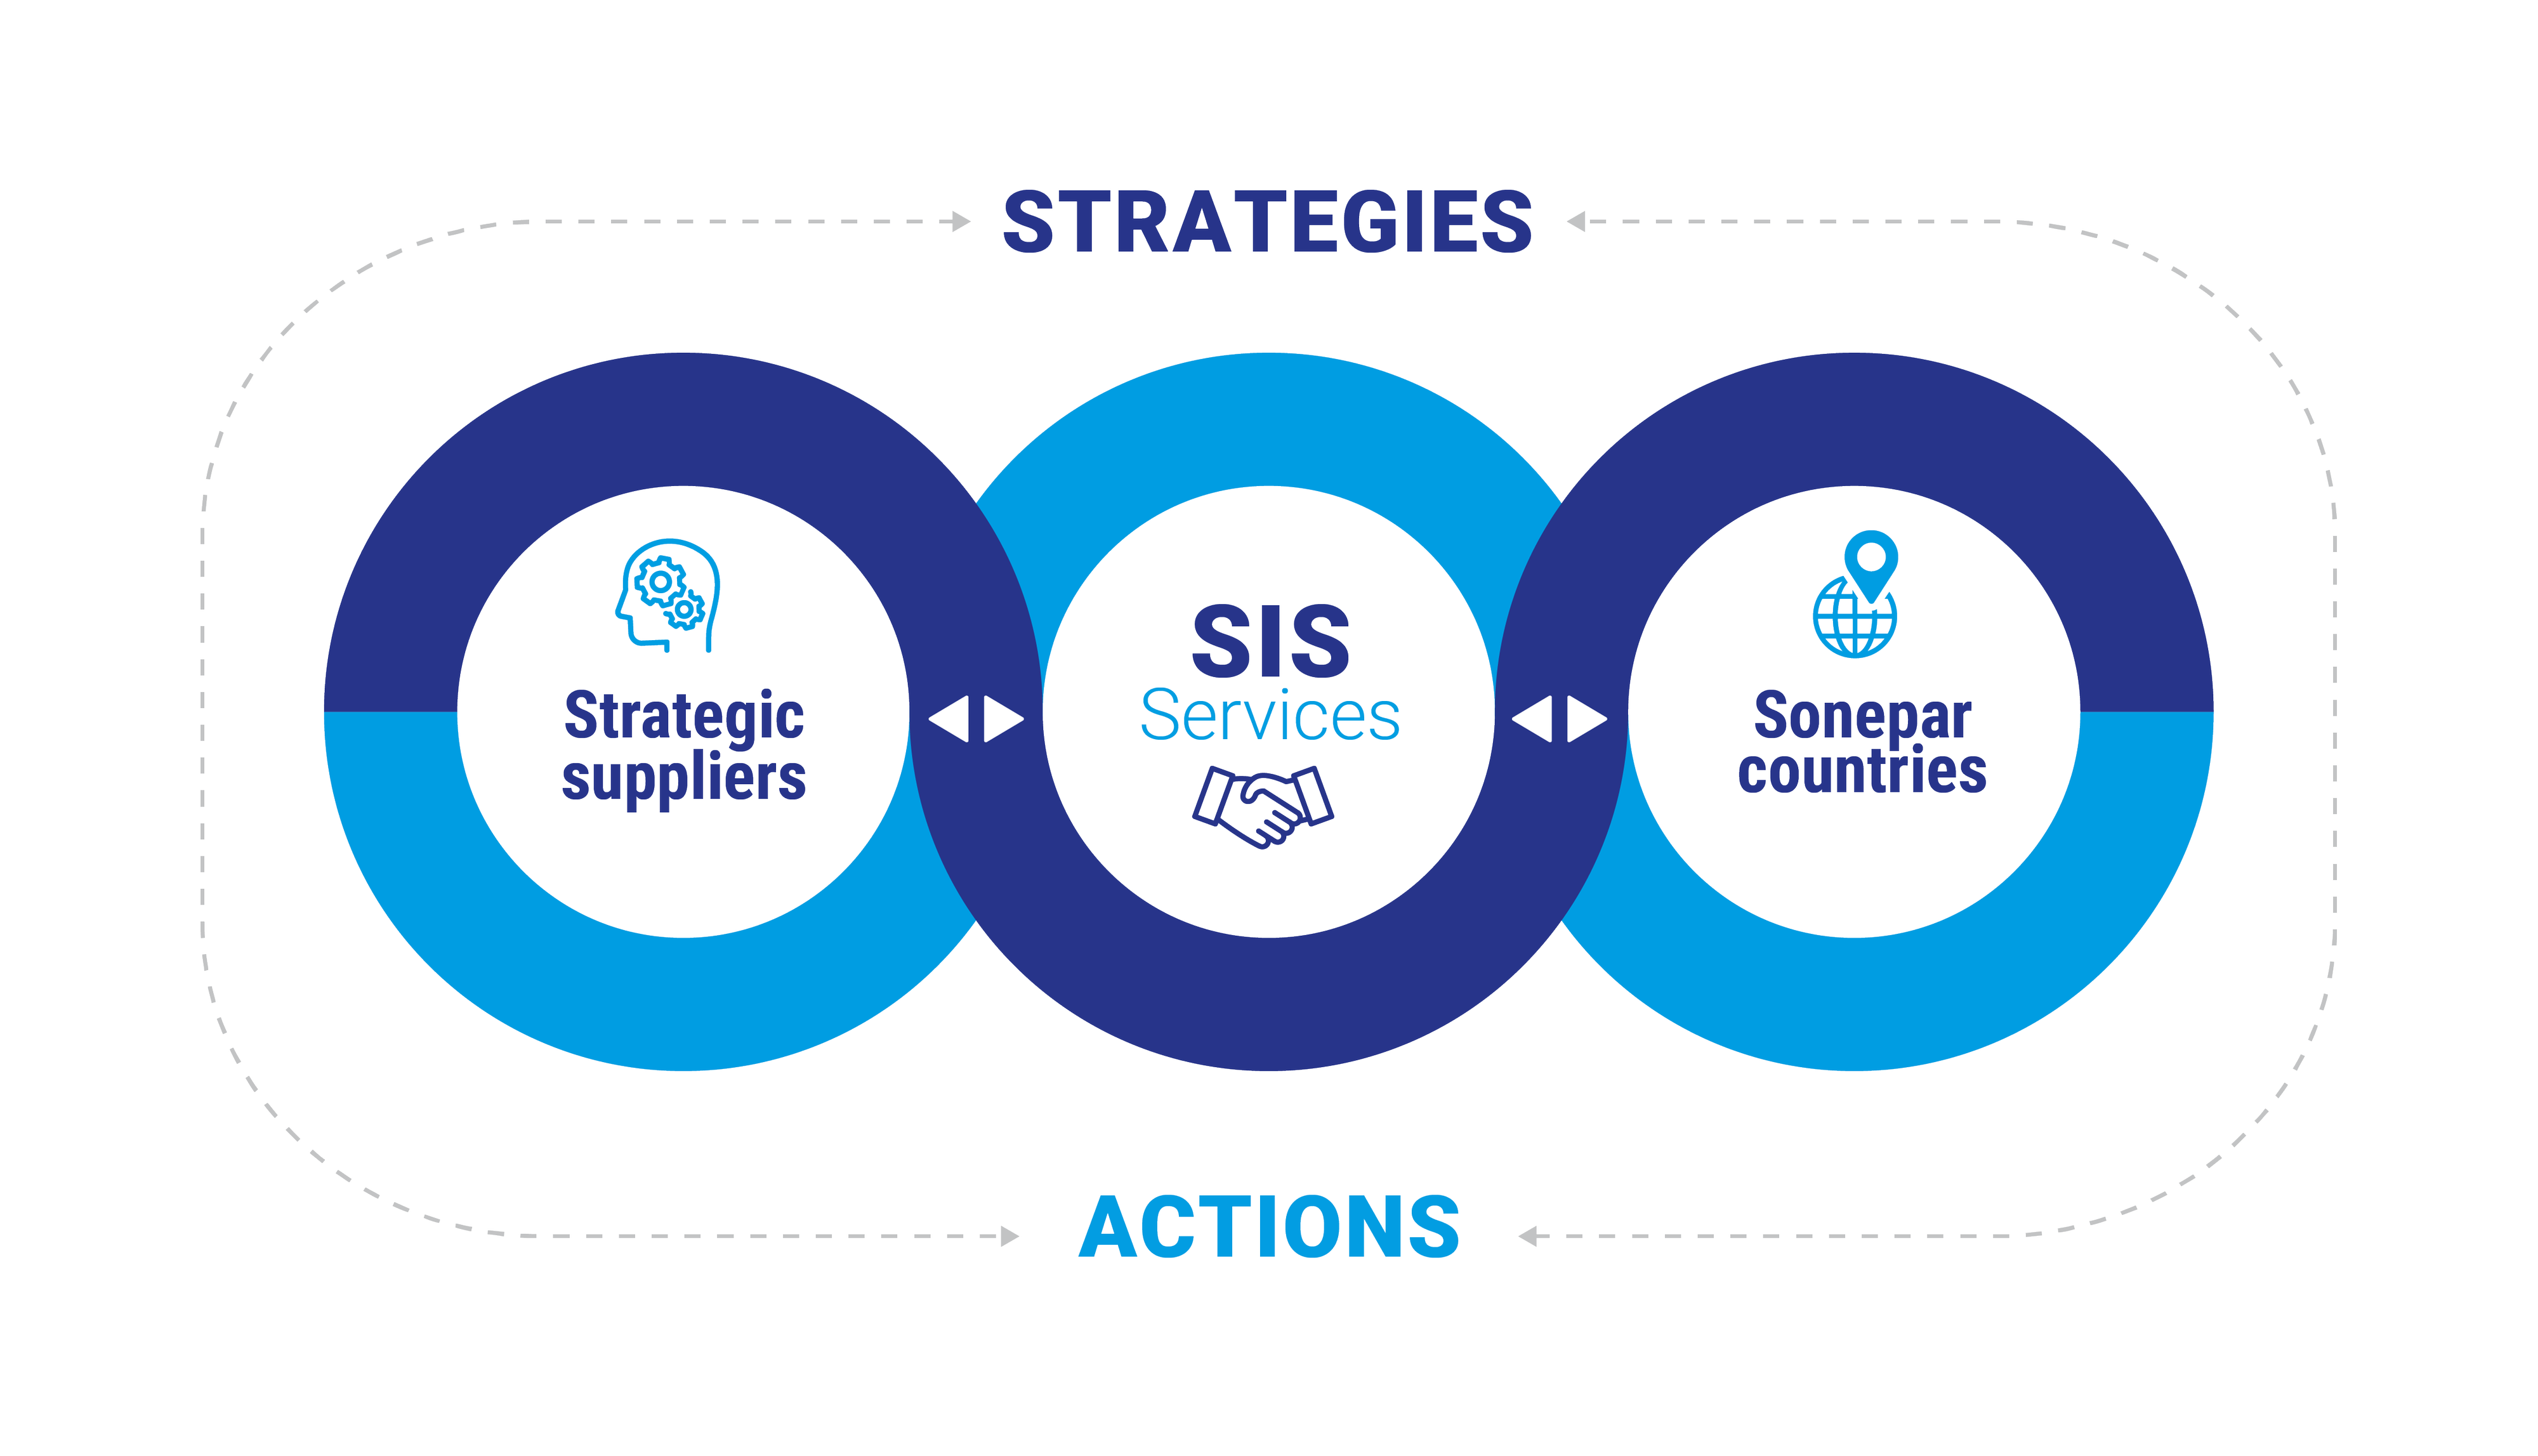 about-strategies-actions